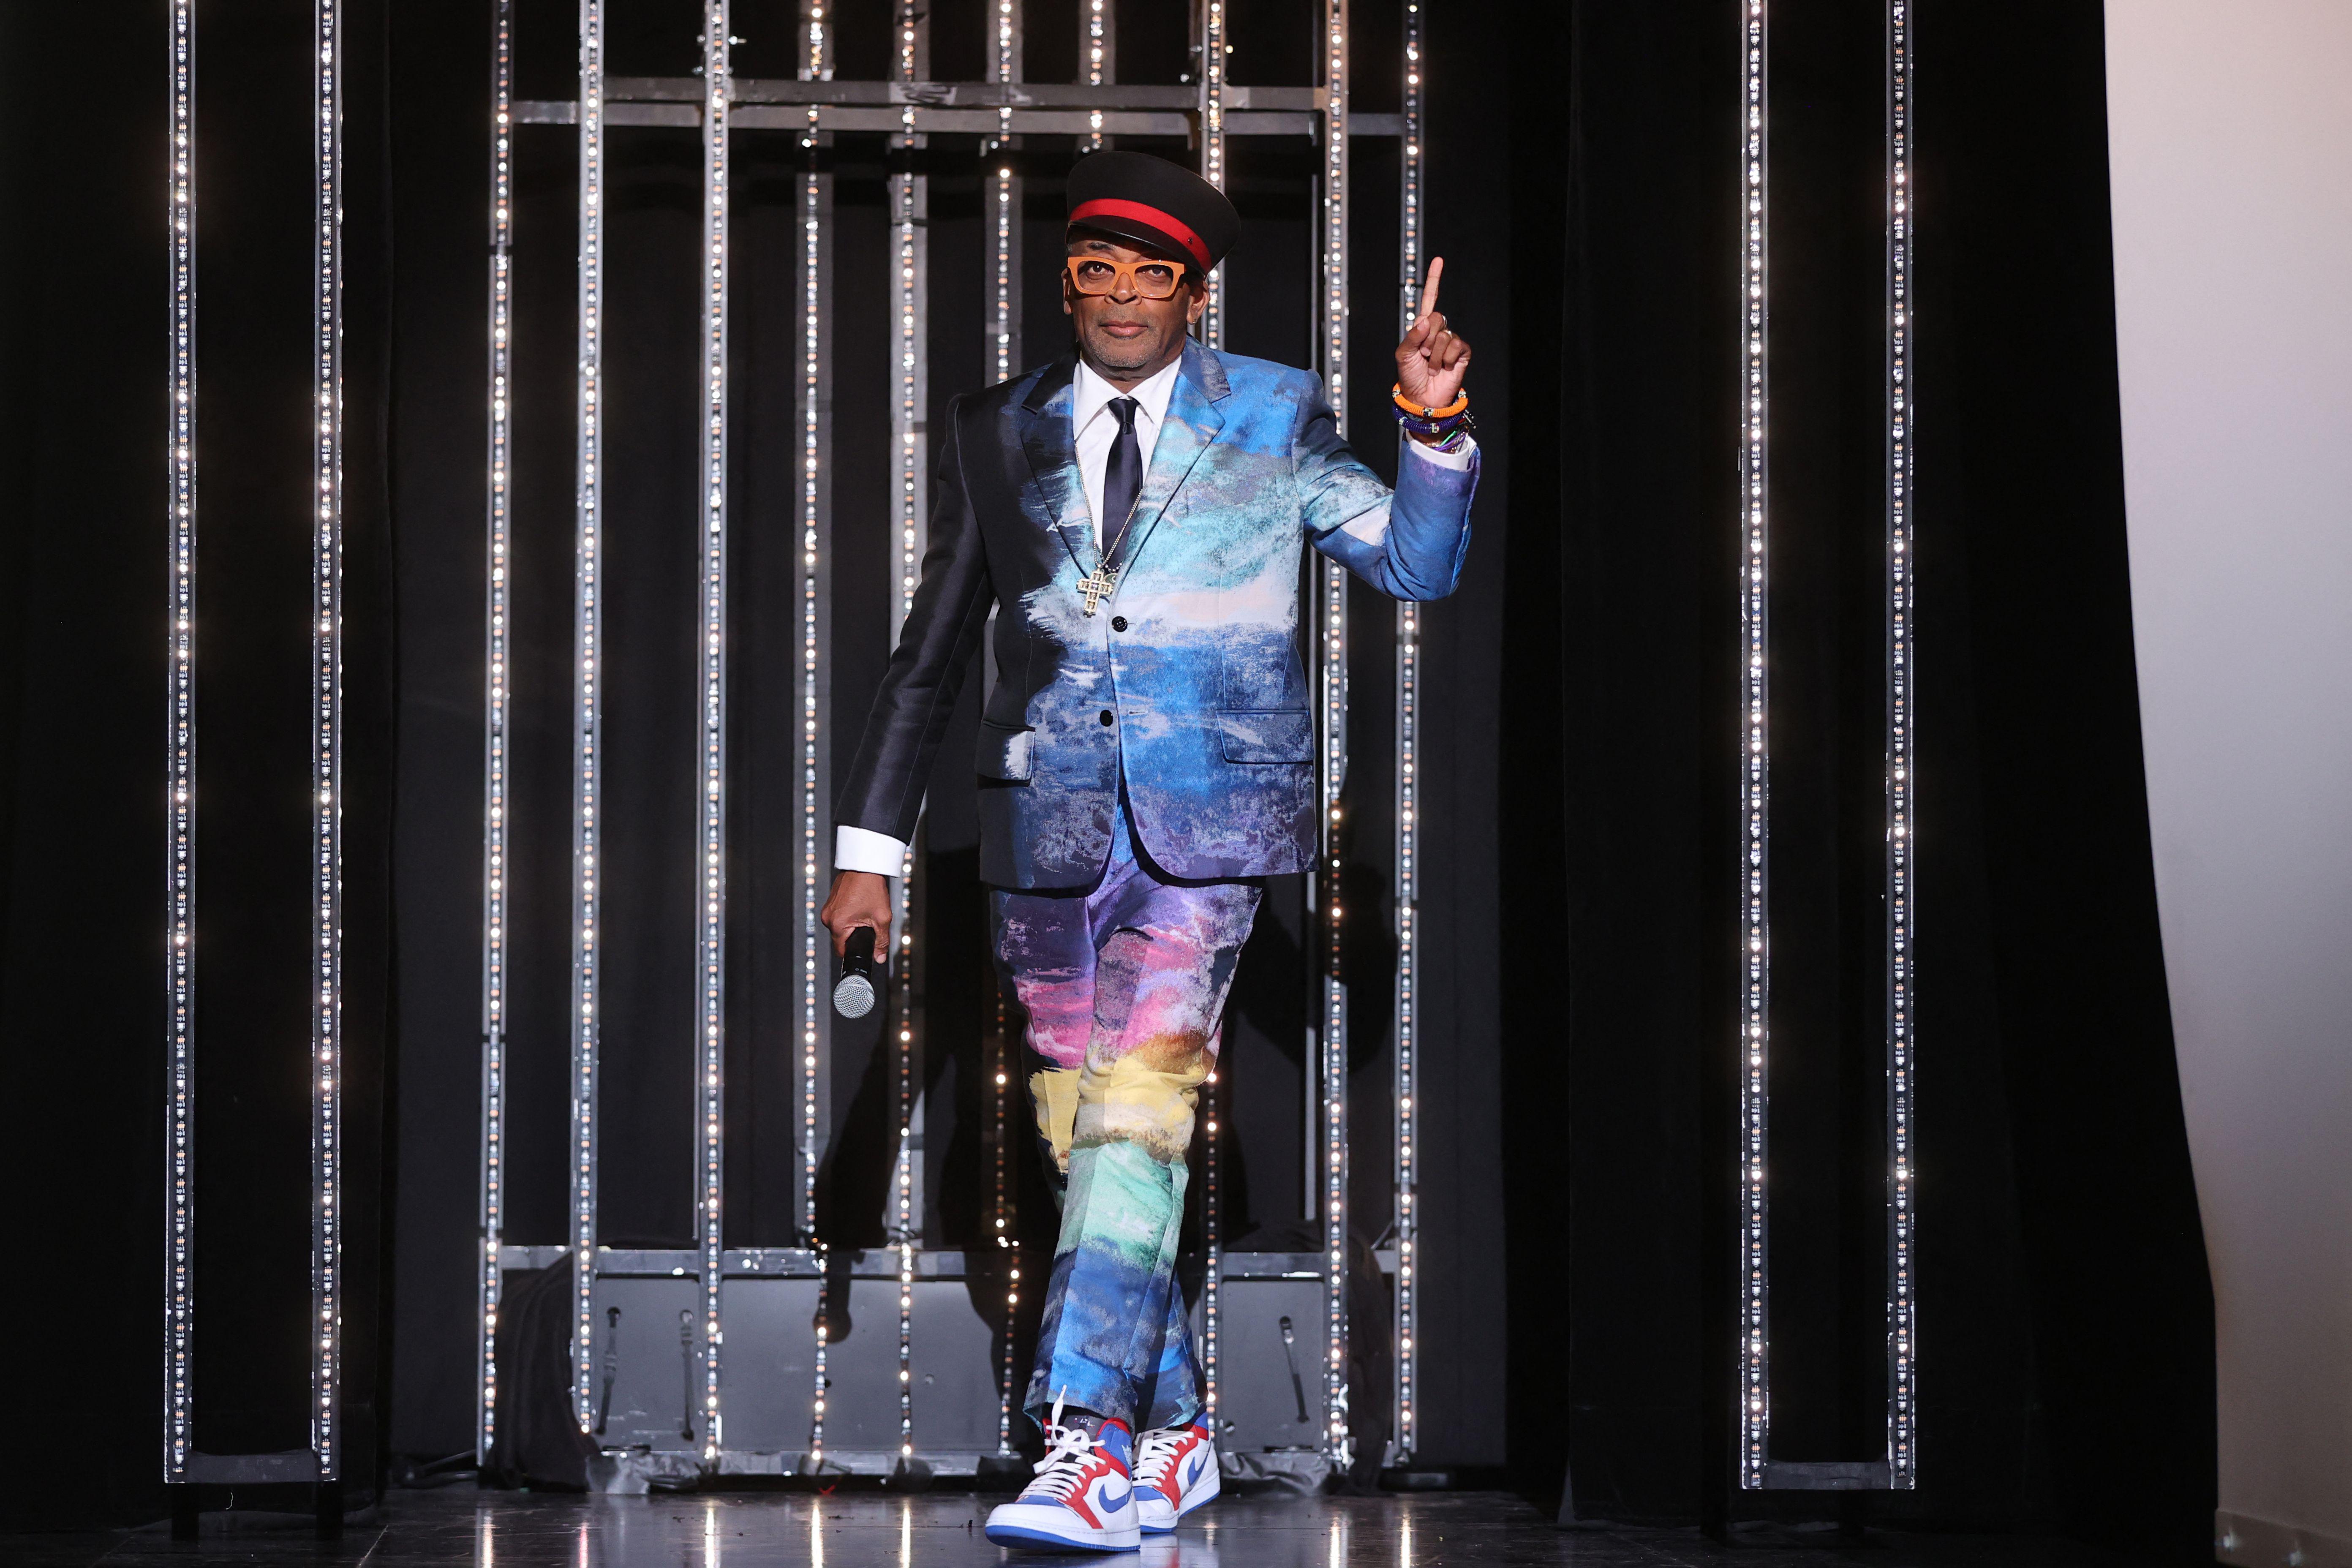 Spike Lee walks out on a stage wearing a suit of rainbow colors.